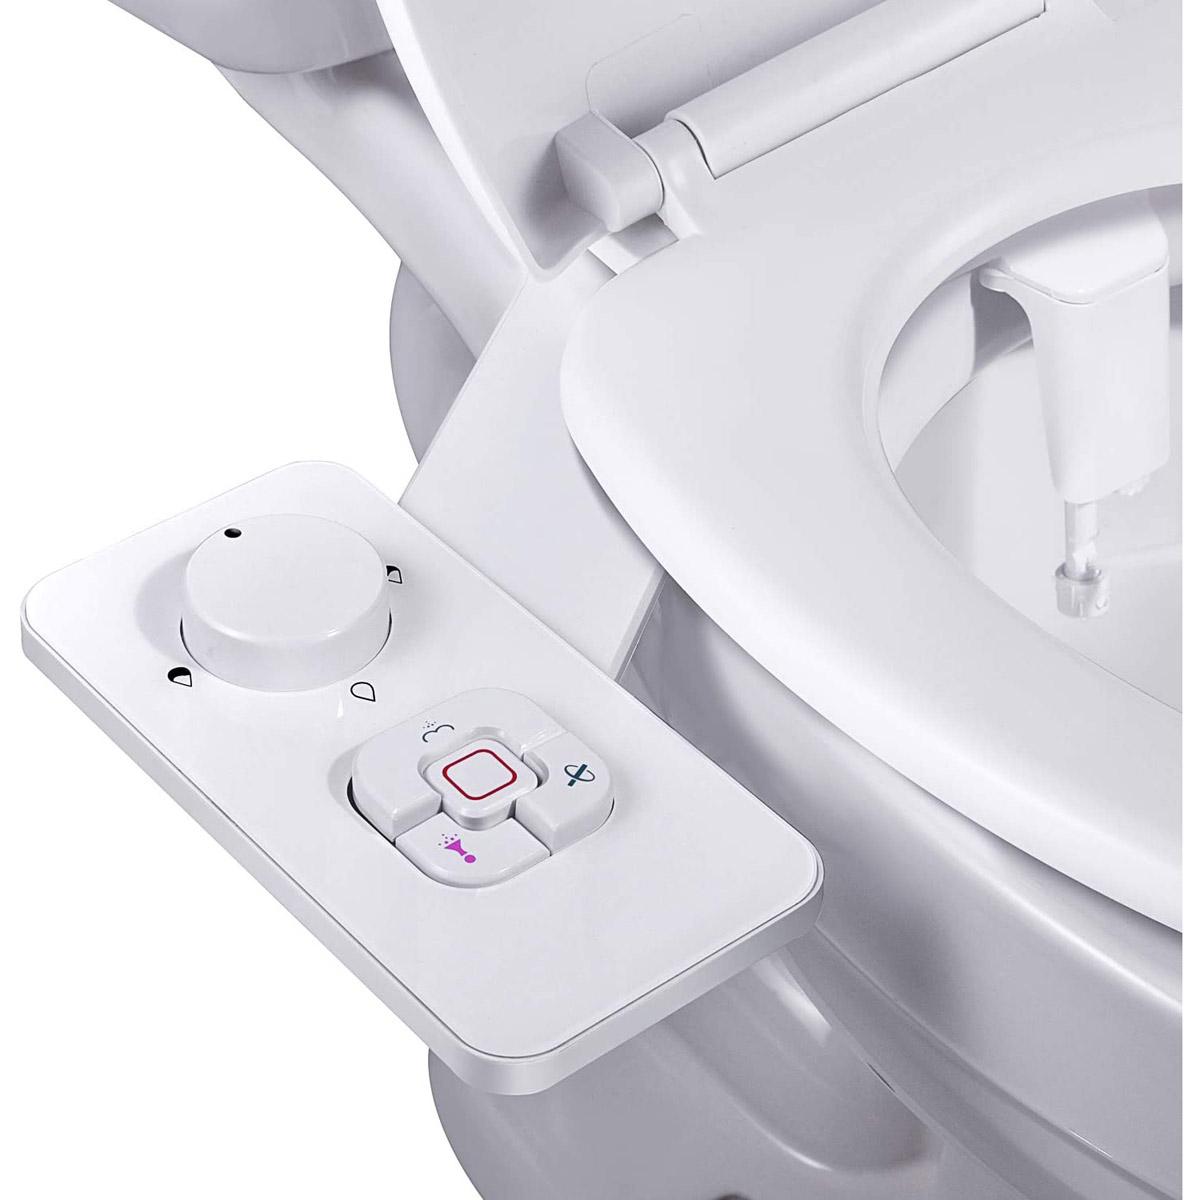 Non-electric Cold Water Bidet Toilet Seat Attachment for $19.99 Shipped